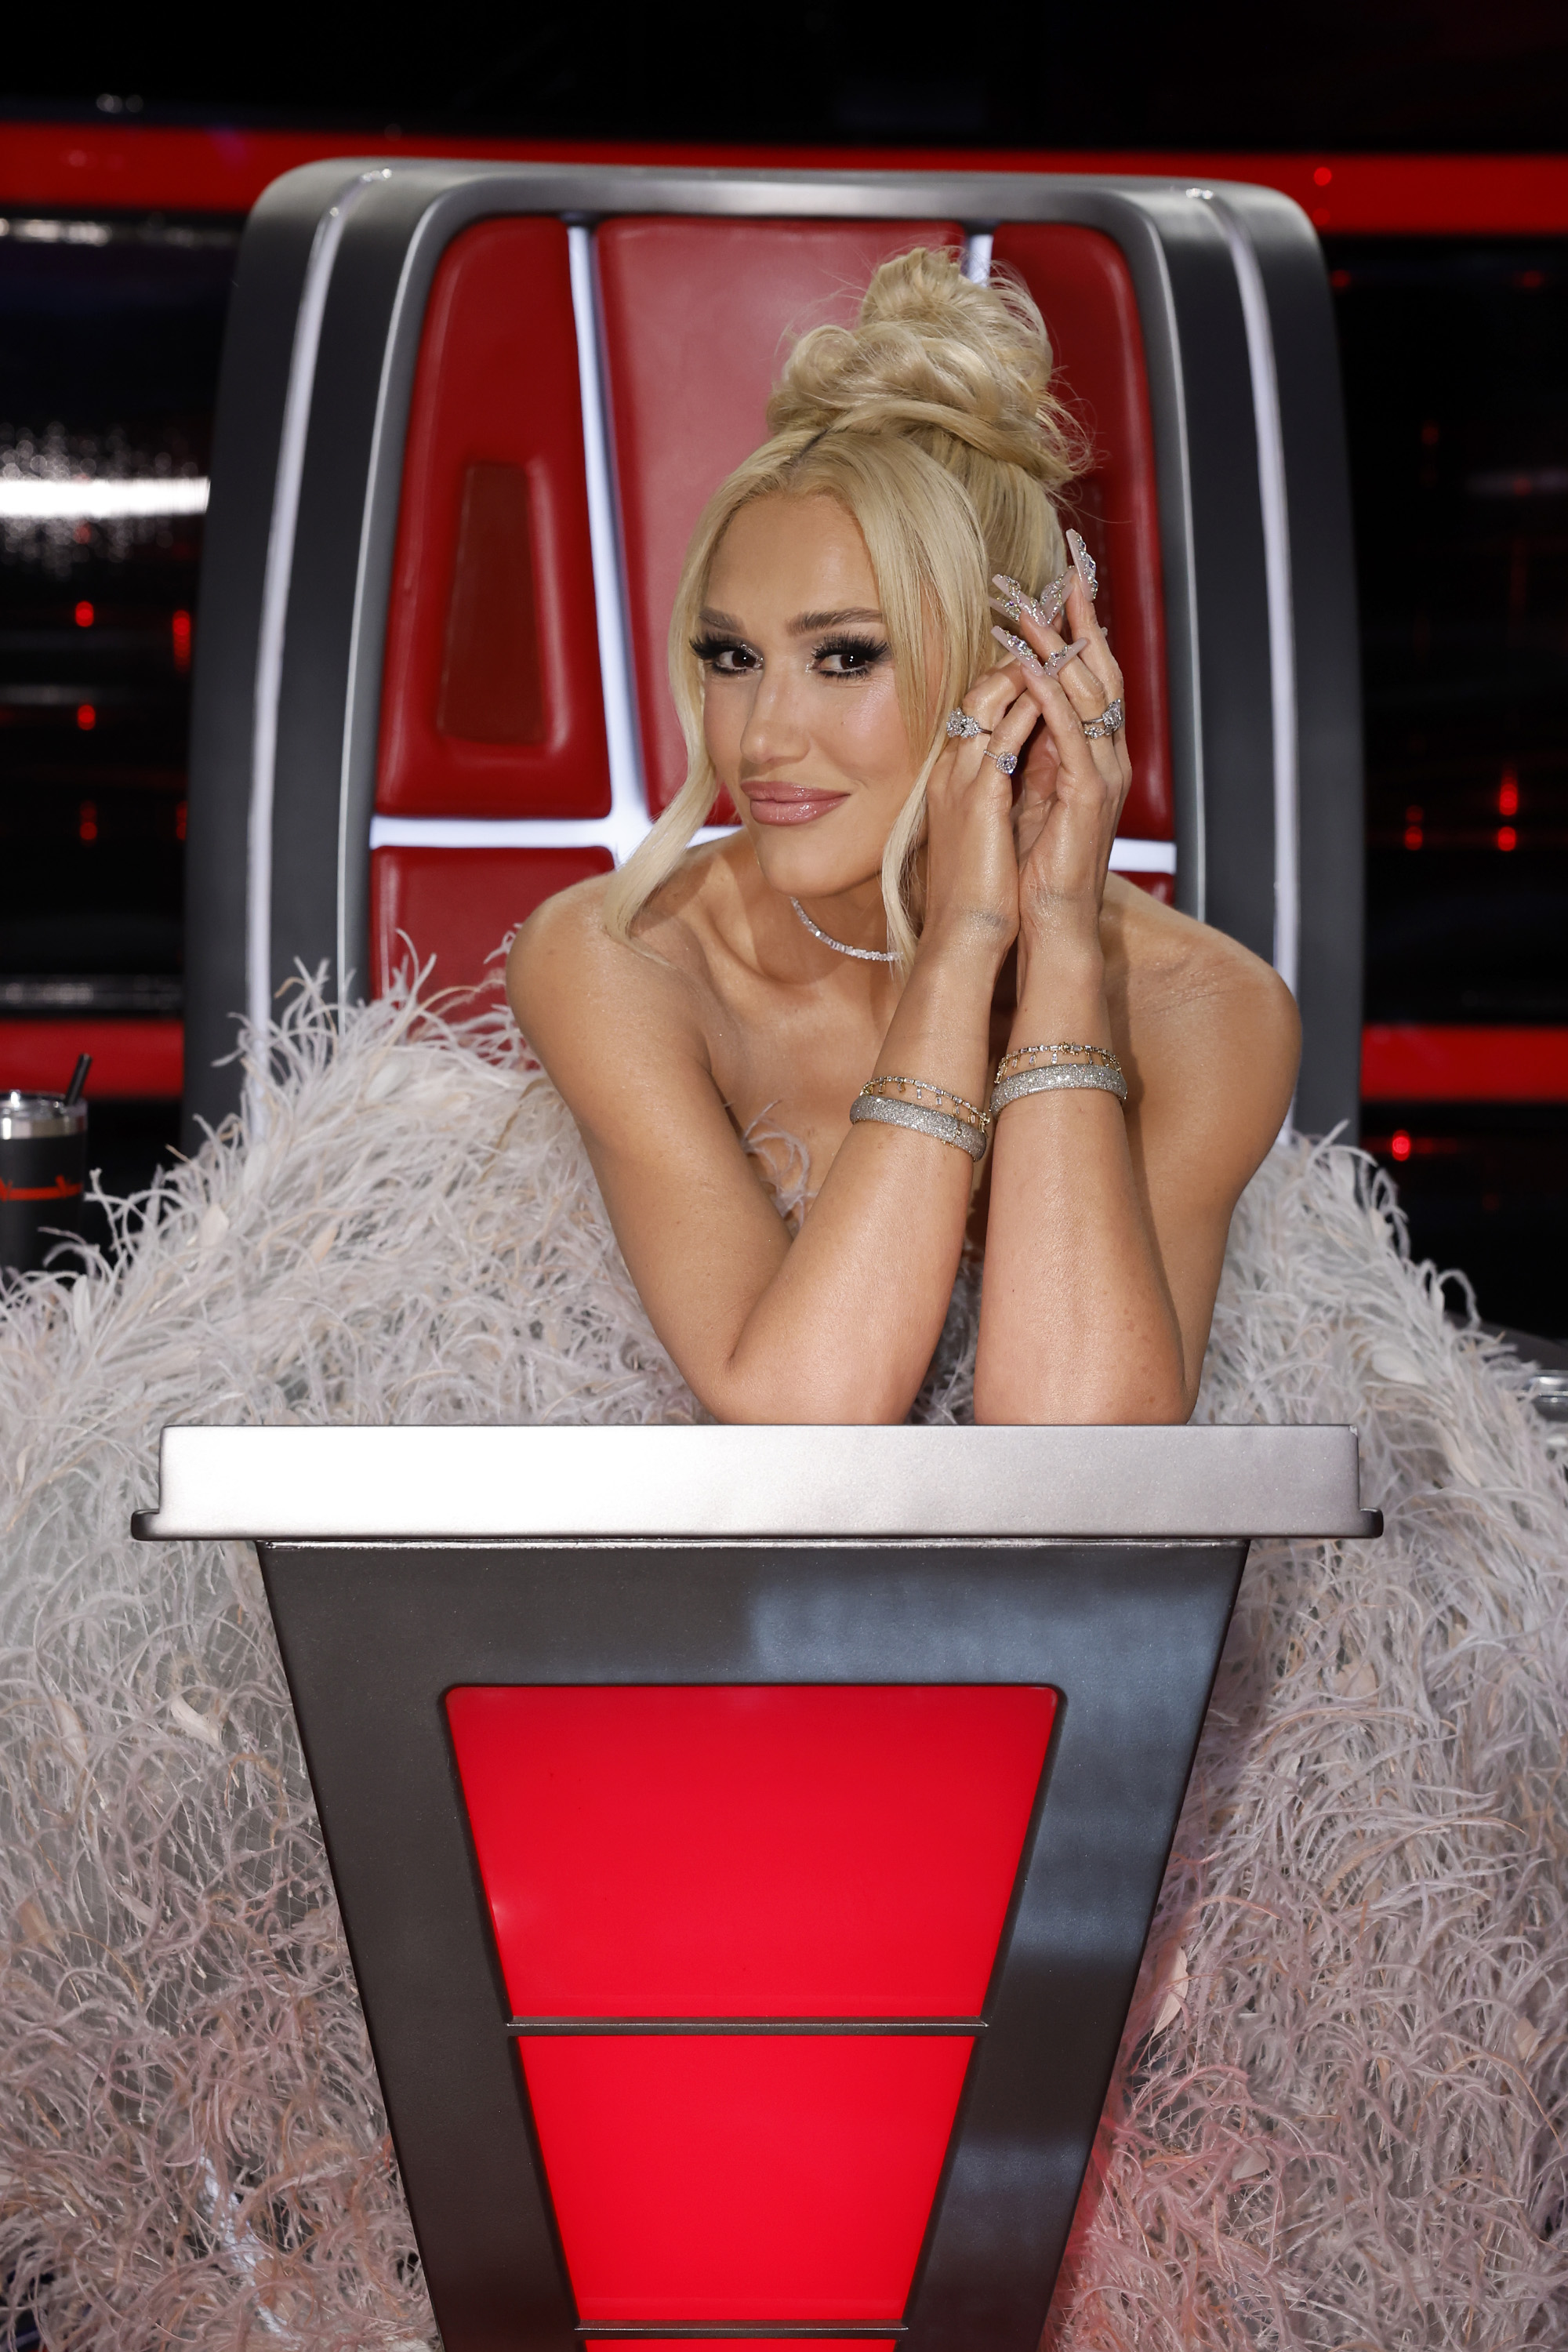 Gwen Stefani at the Season 24 finale of "The Voice" | Source: Getty Images